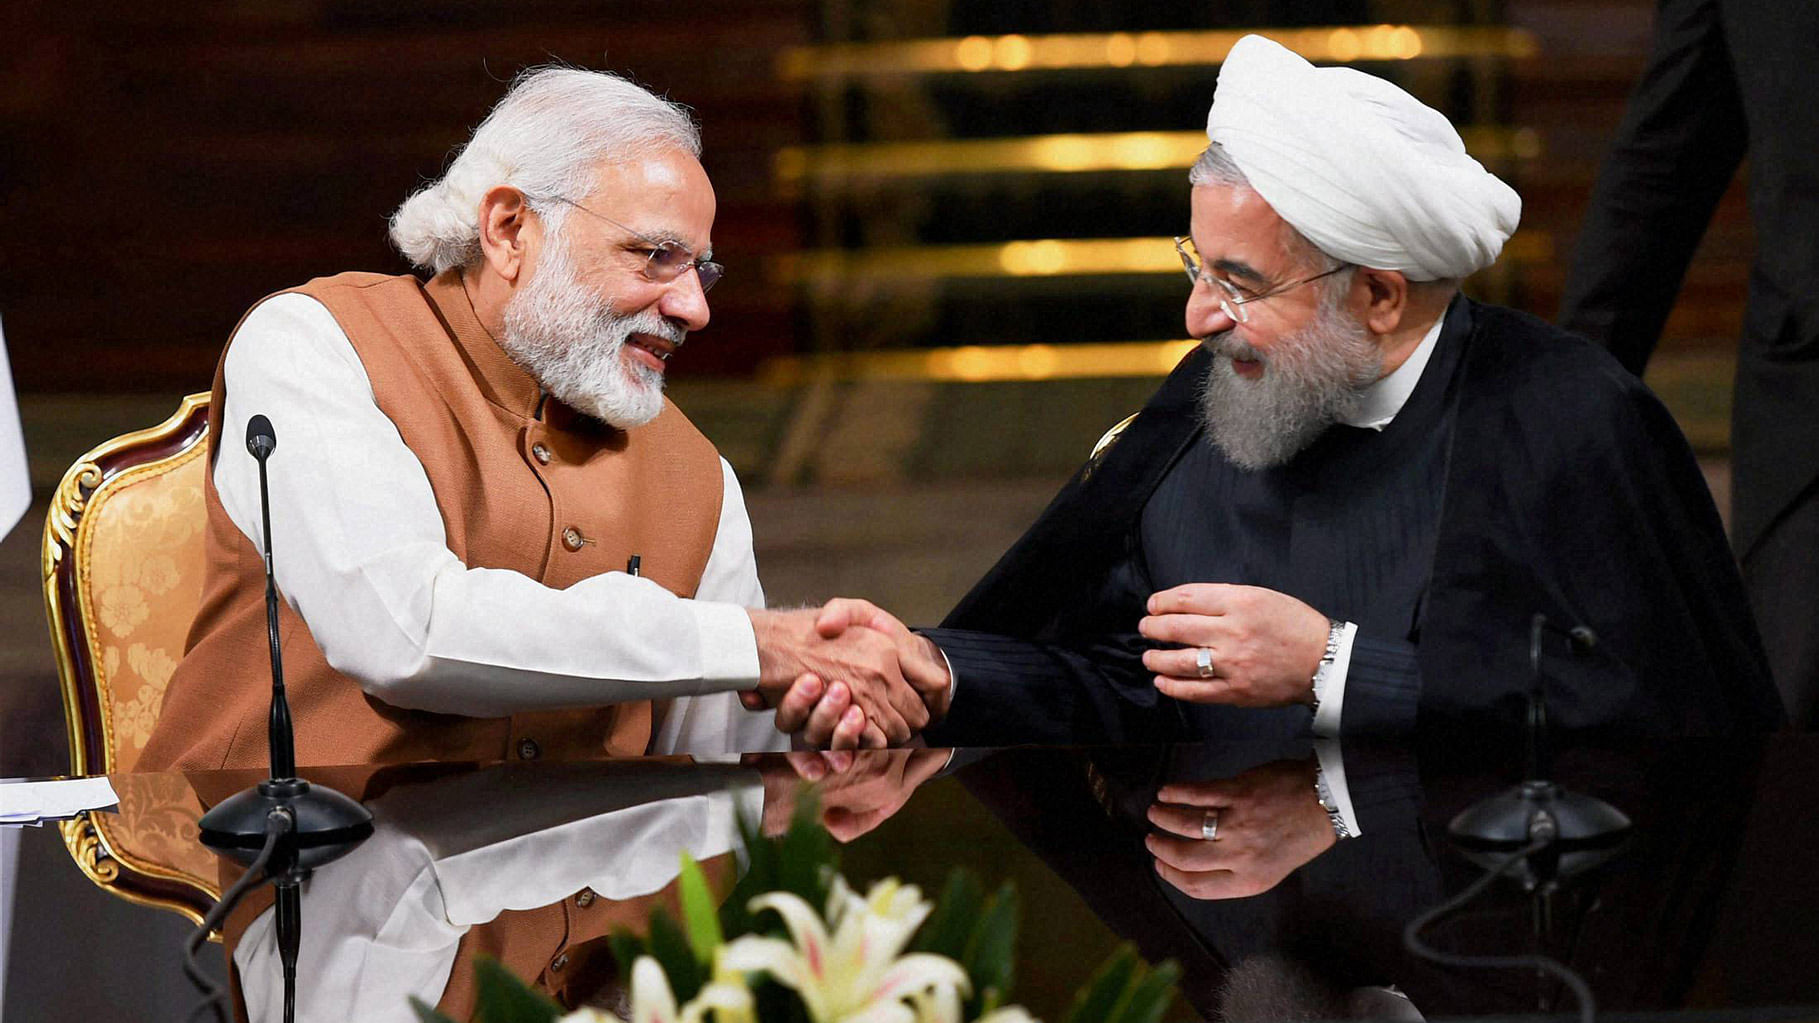 In this photo from 2016, Prime Minister Narendra Modi shakes hands with Iranian President Hassan Rouhan during a joint press conference in Tehran.&nbsp;